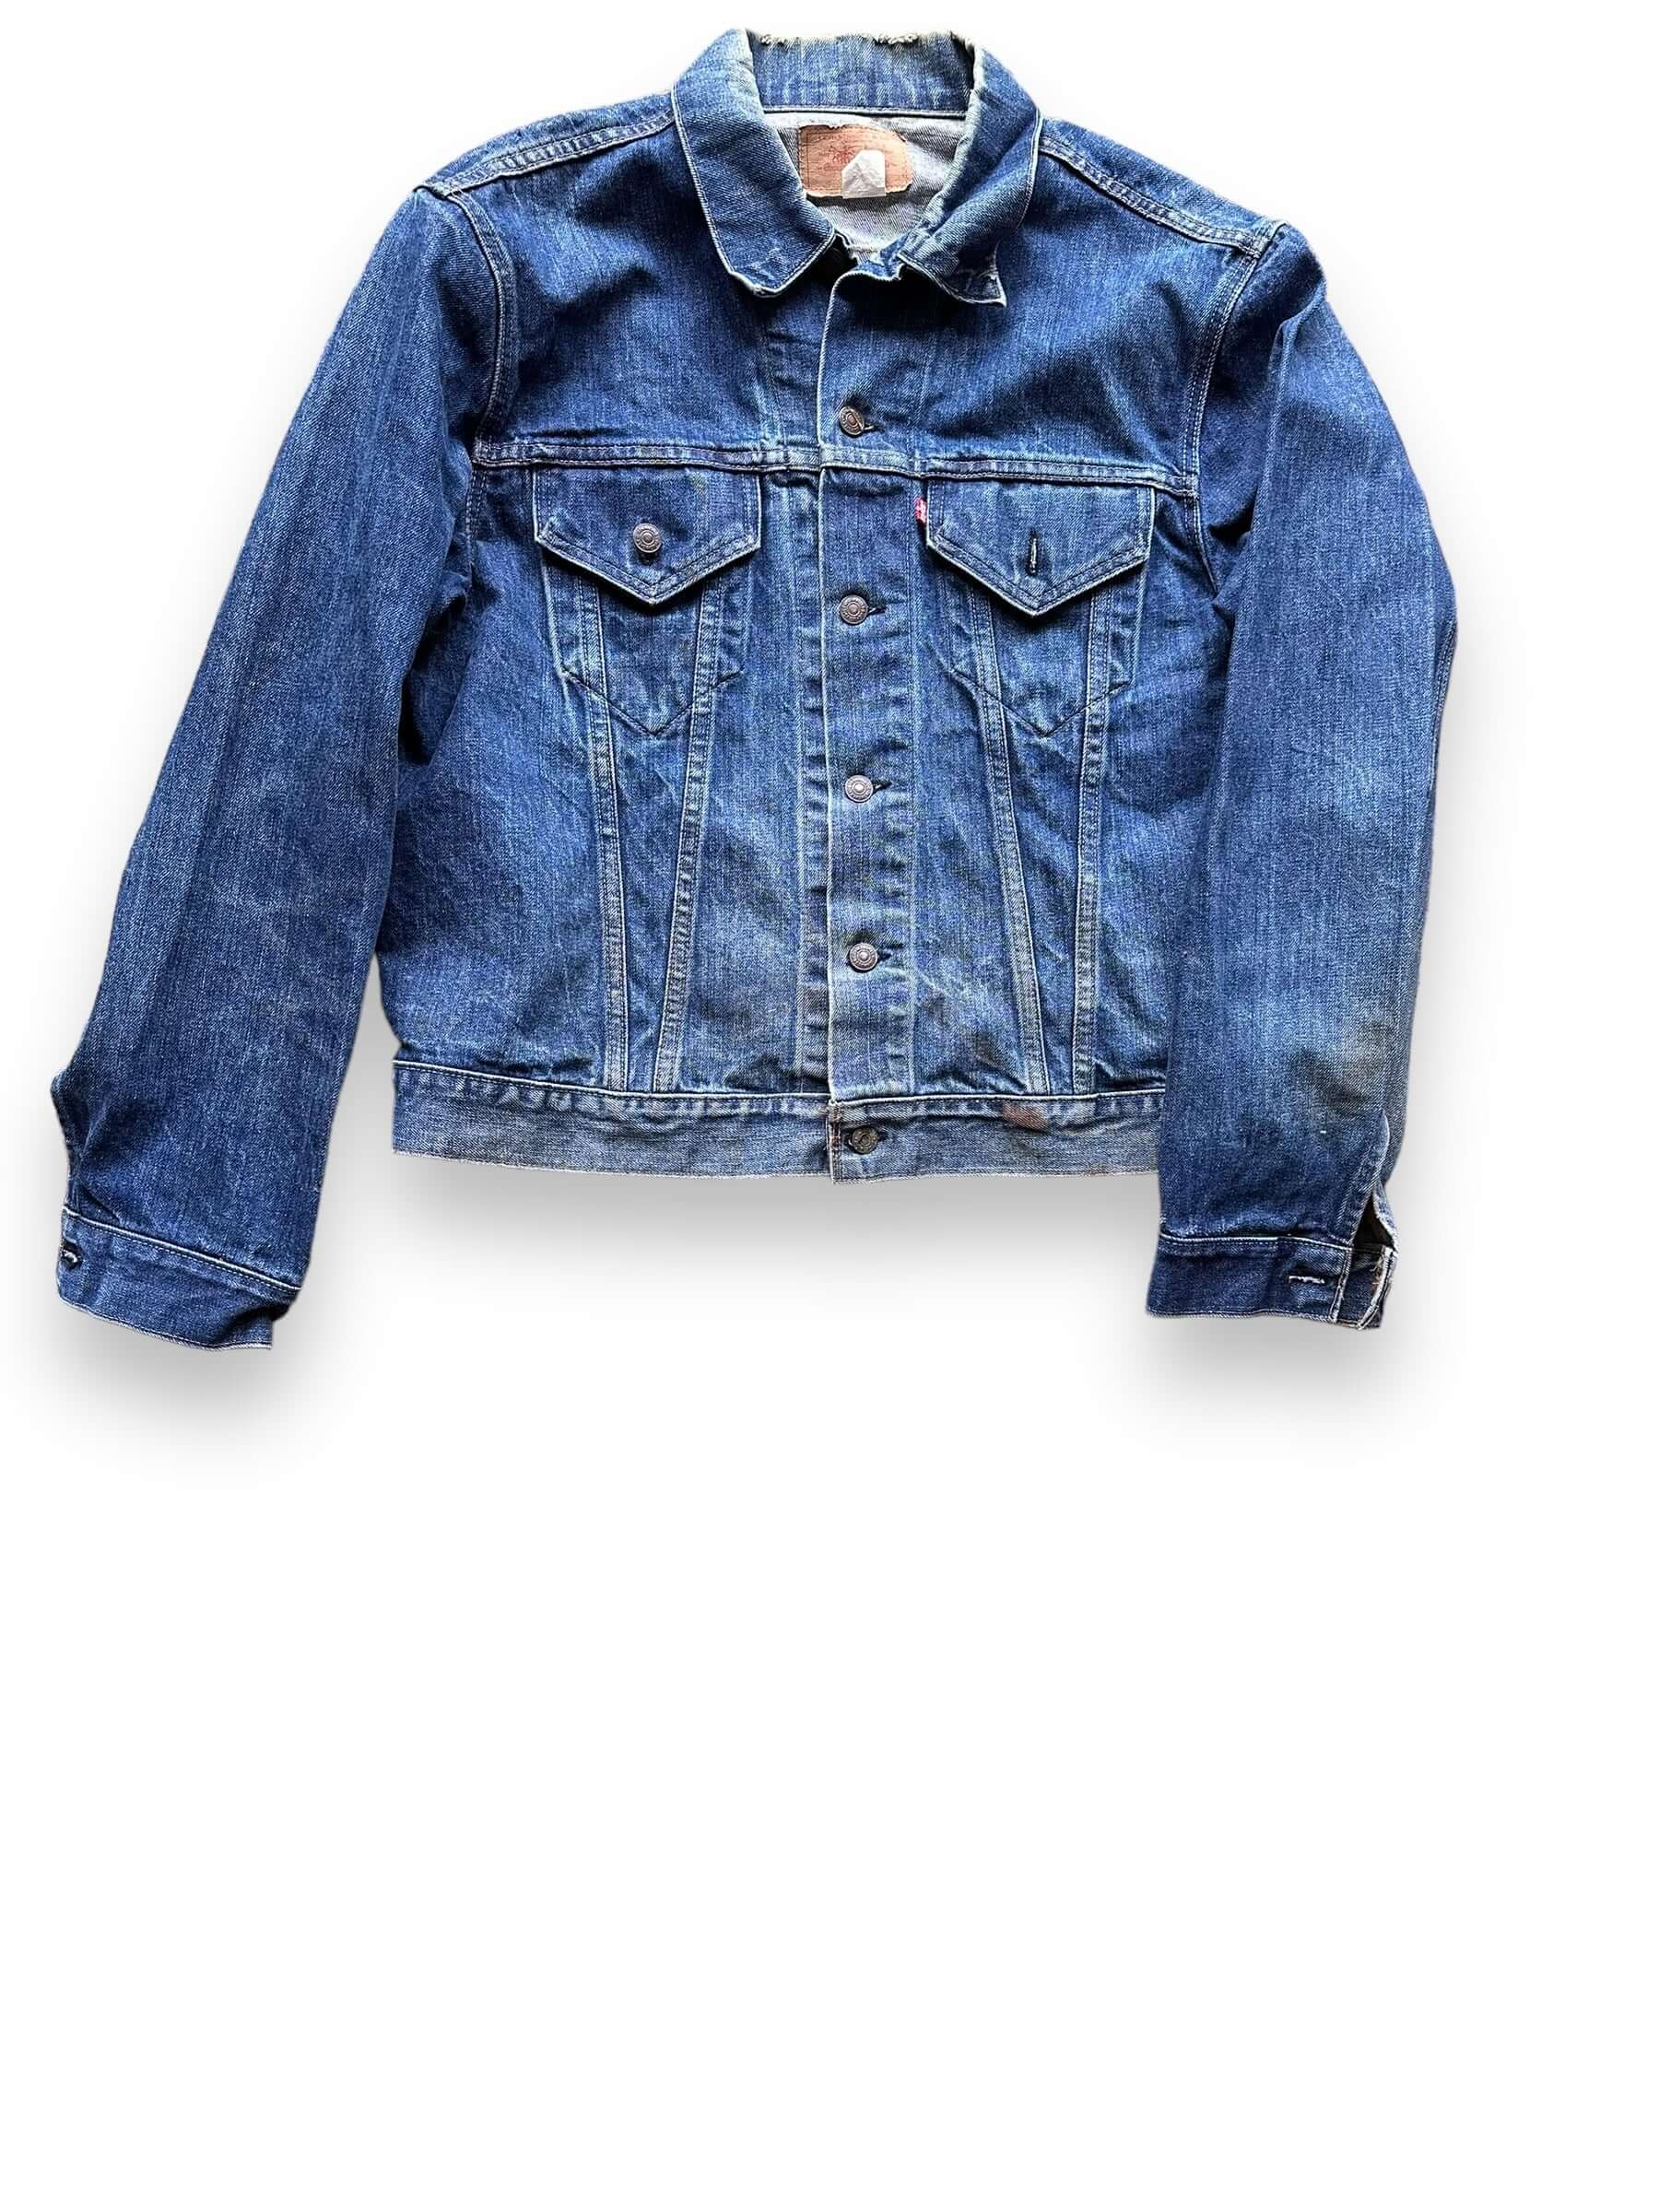 Classic Denim Solid Jacket For Women at Rs 1147 | Mumbai| ID: 2849205872230